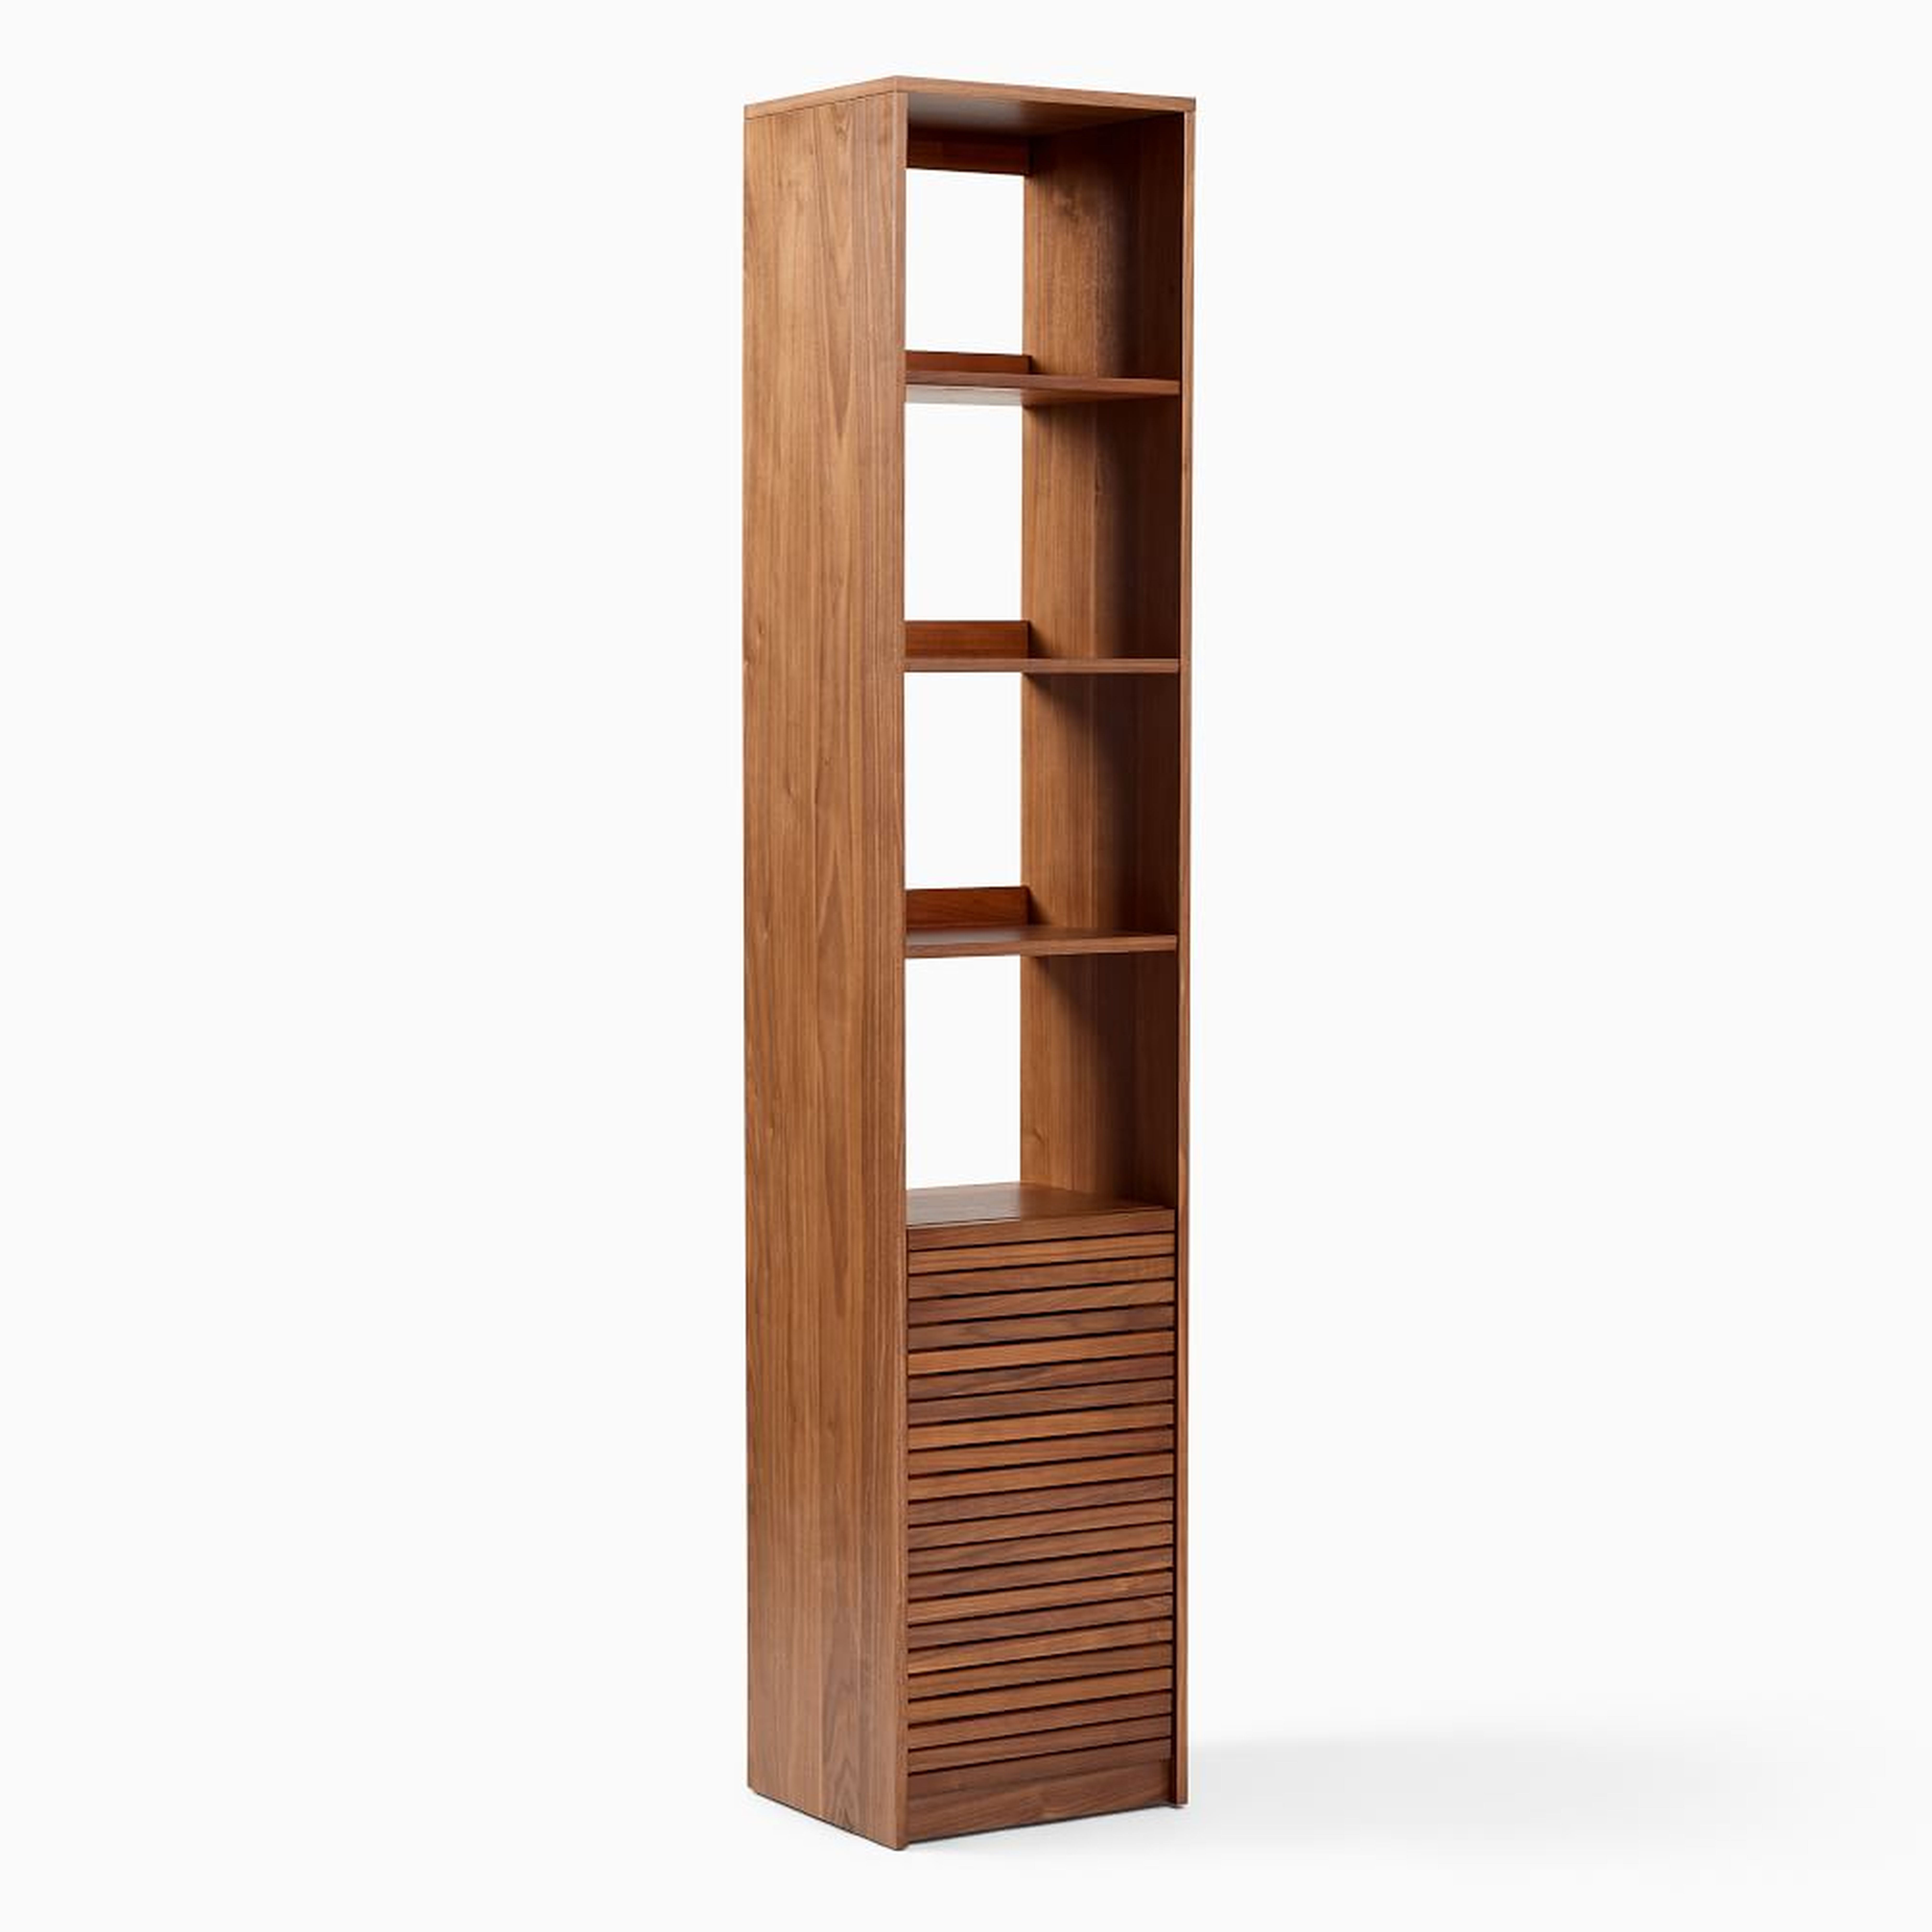 Bryce 17 Inch Narrow Open and Closed Shelving, Cool Walnut - West Elm